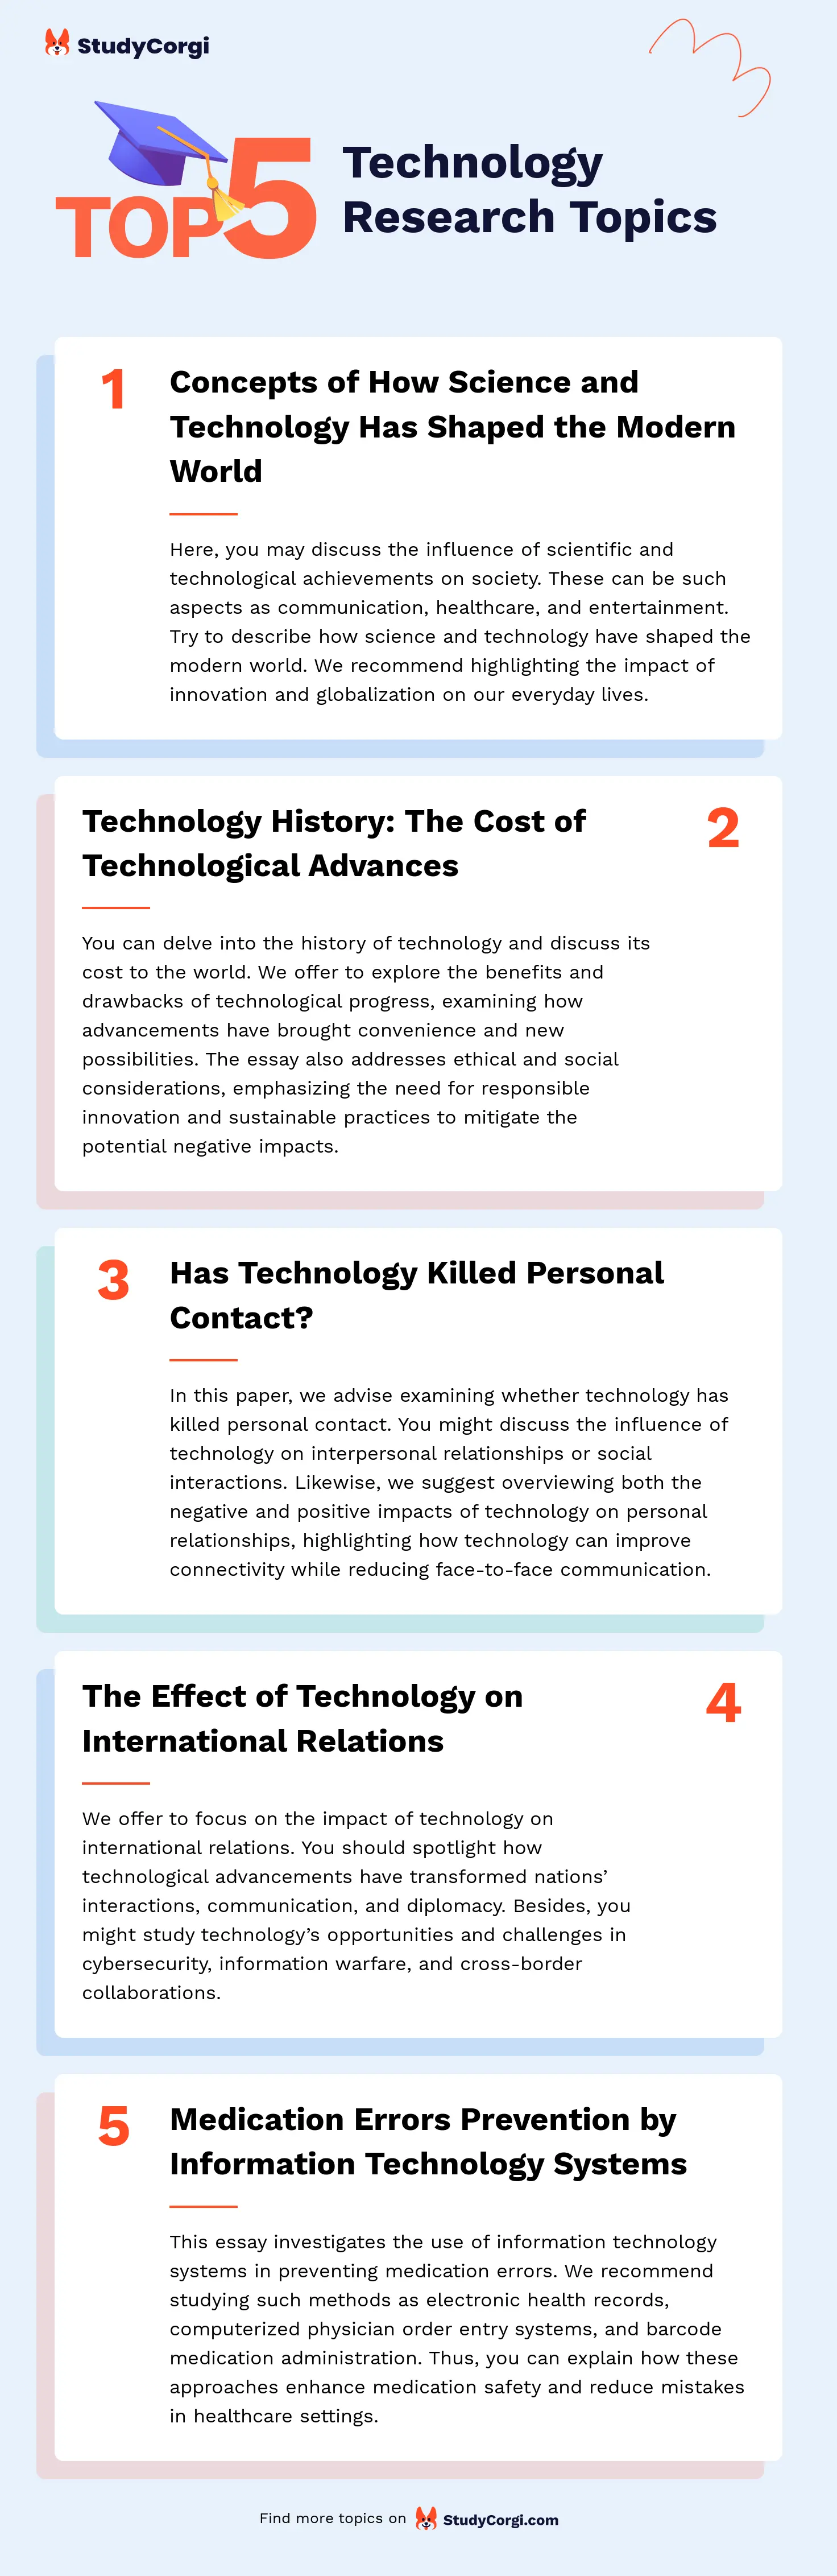 TOP-5 Technology Research Topics